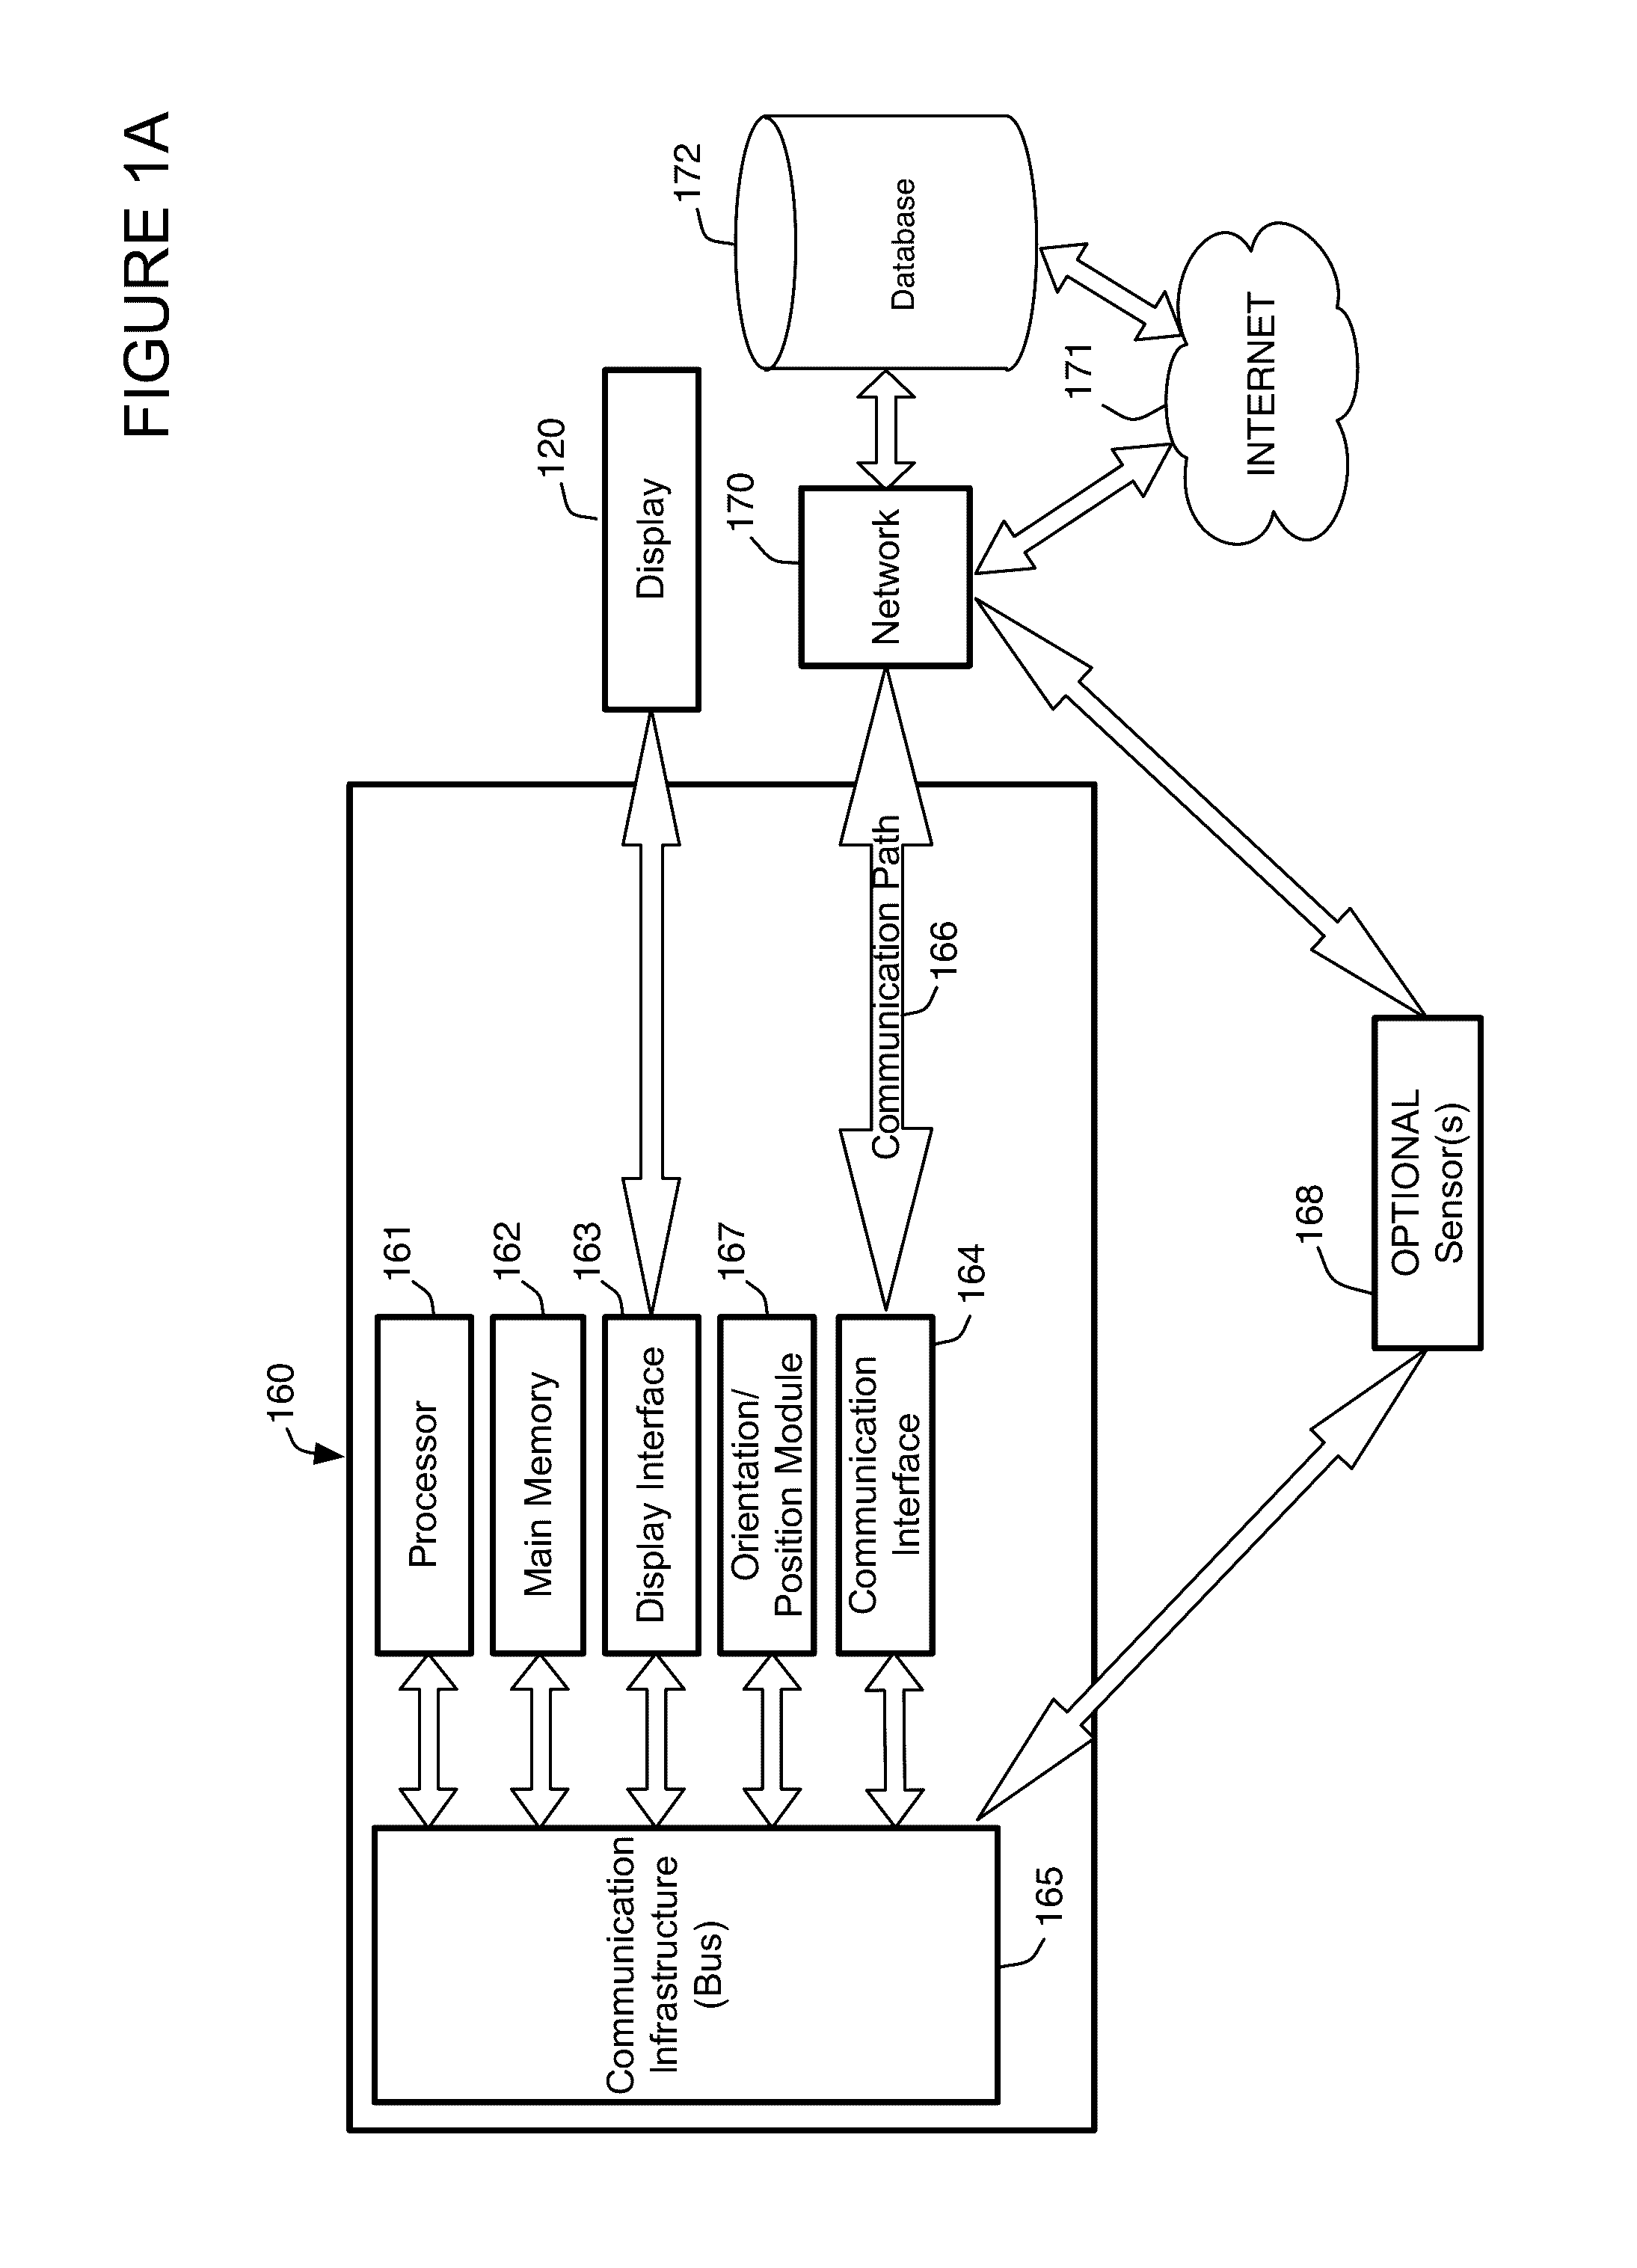 Multi-sensor event detection and tagging system